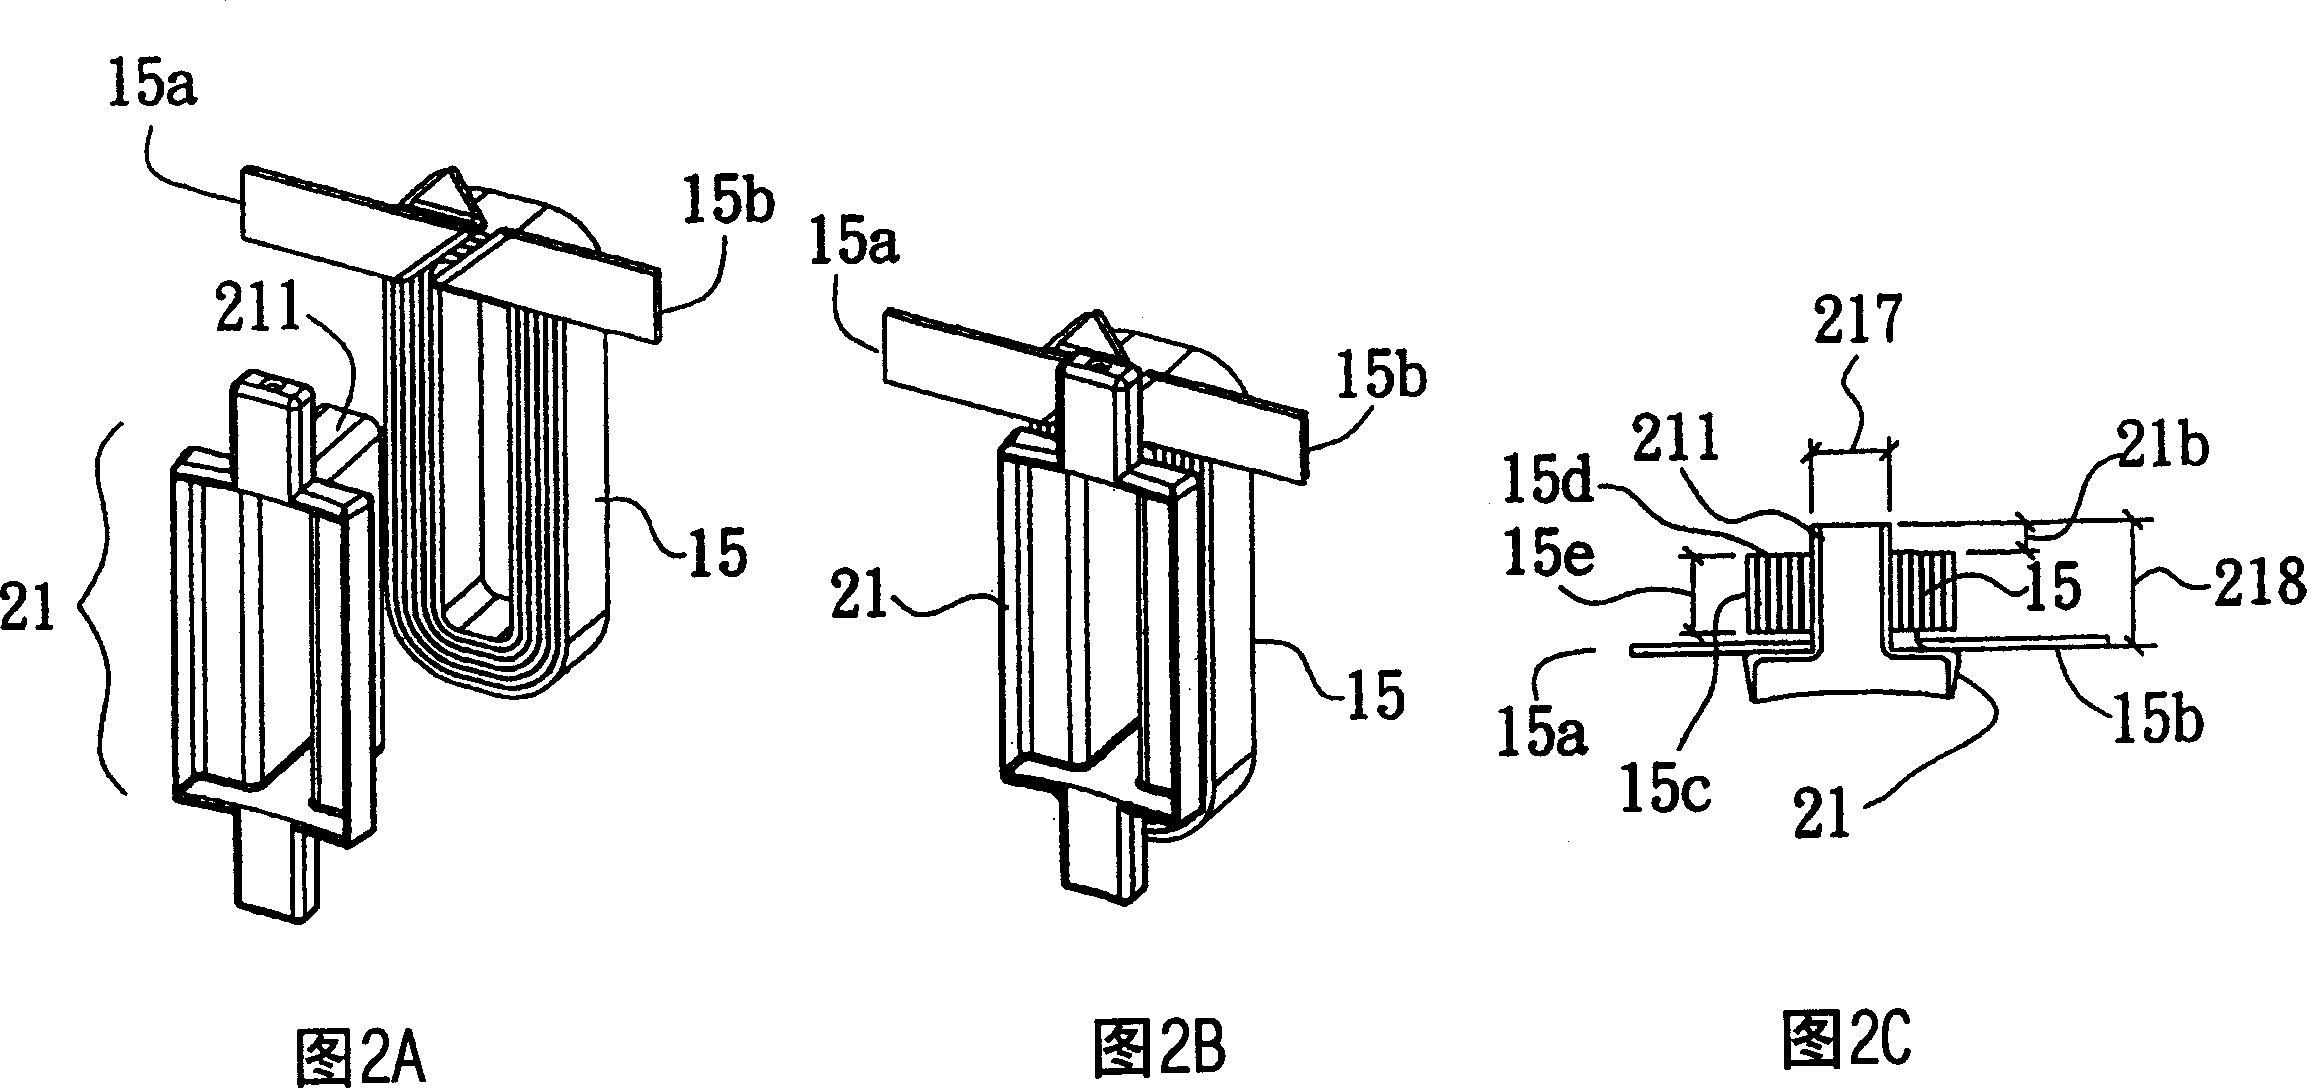 Combined stator structure with flat winding